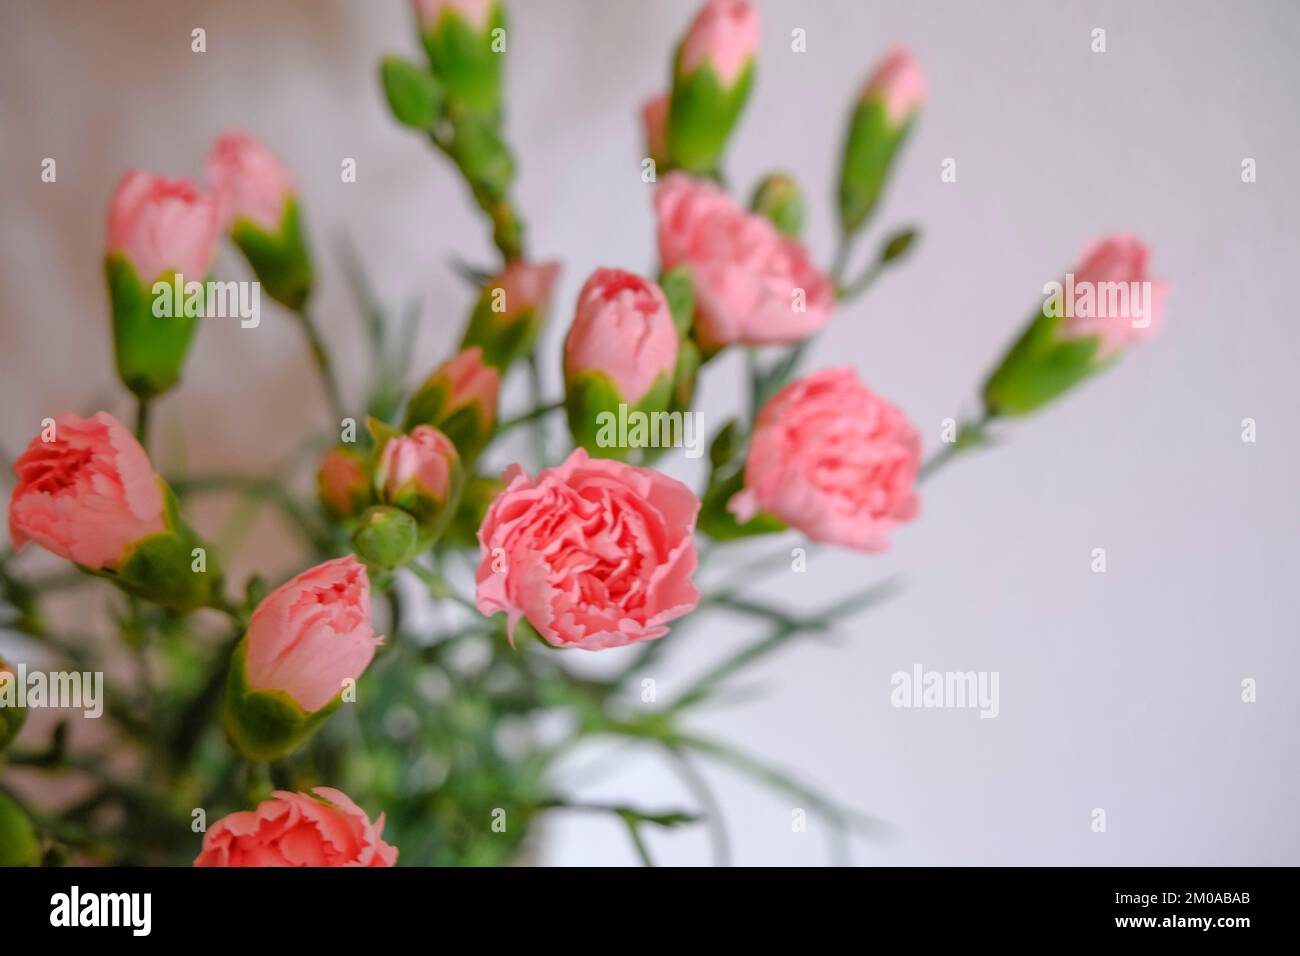 pink carnations blossoms closeup on white background. Floral background. Postcard design Stock Photo